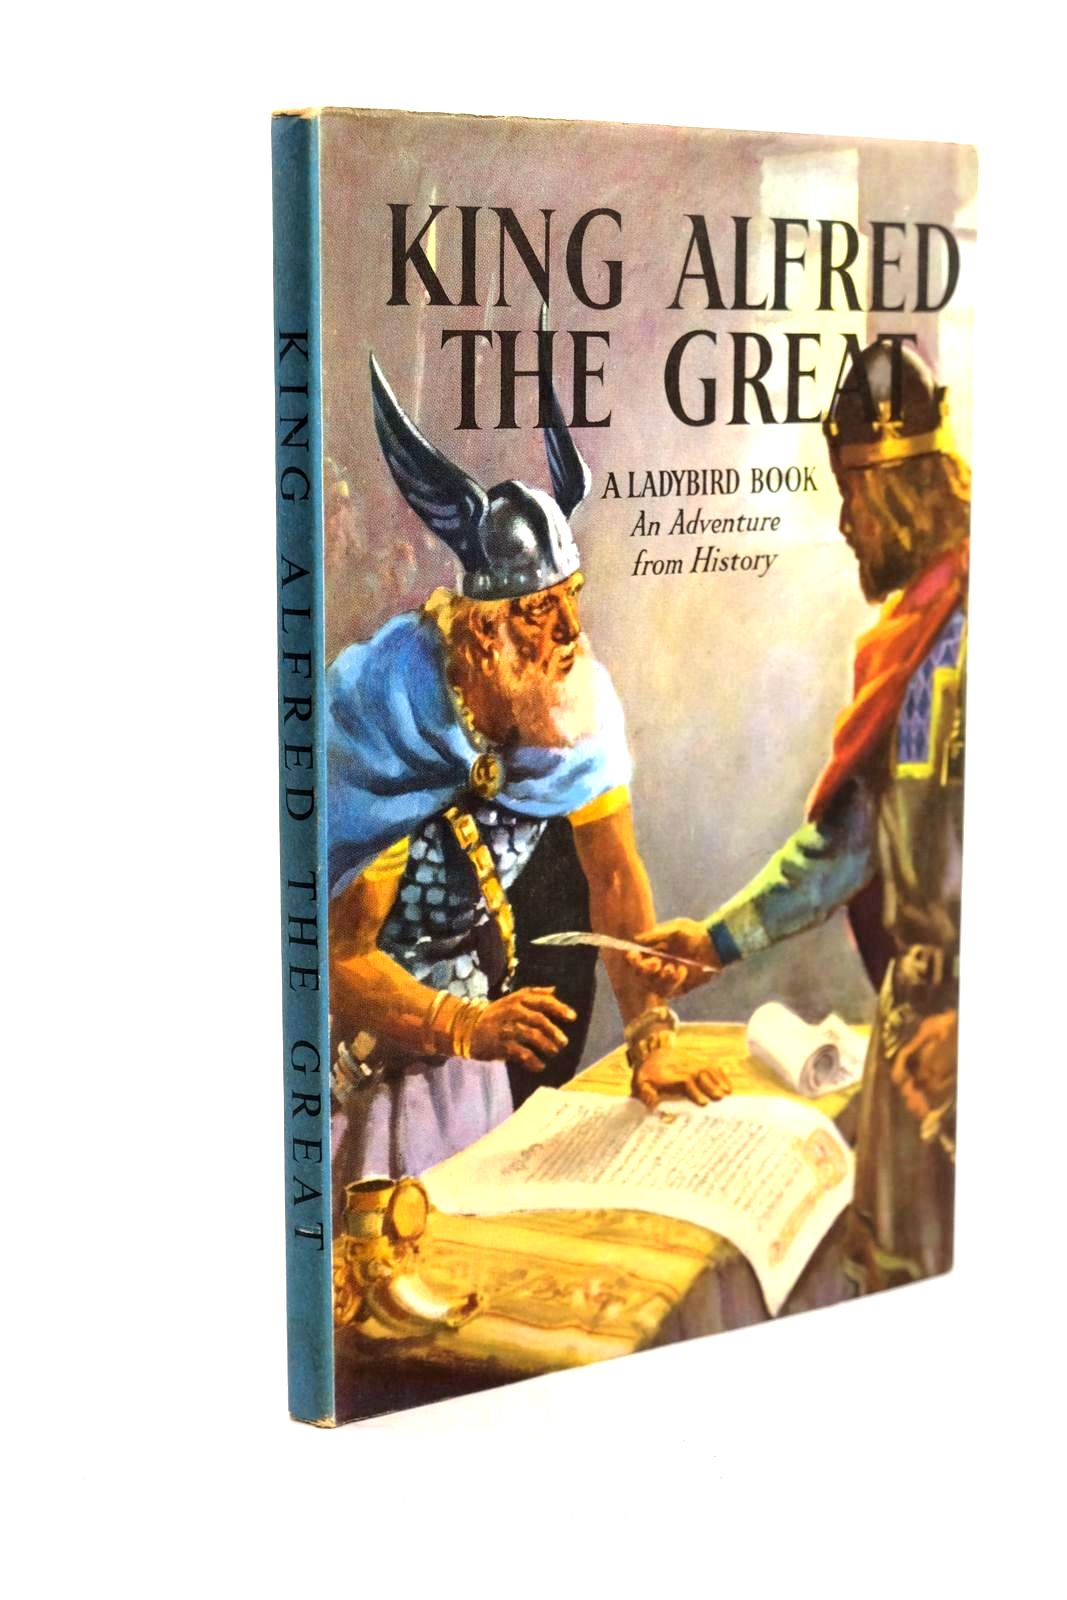 Photo of KING ALFRED THE GREAT written by Peach, L. Du Garde illustrated by Kenney, John published by Wills & Hepworth Ltd. (STOCK CODE: 1320628)  for sale by Stella & Rose's Books